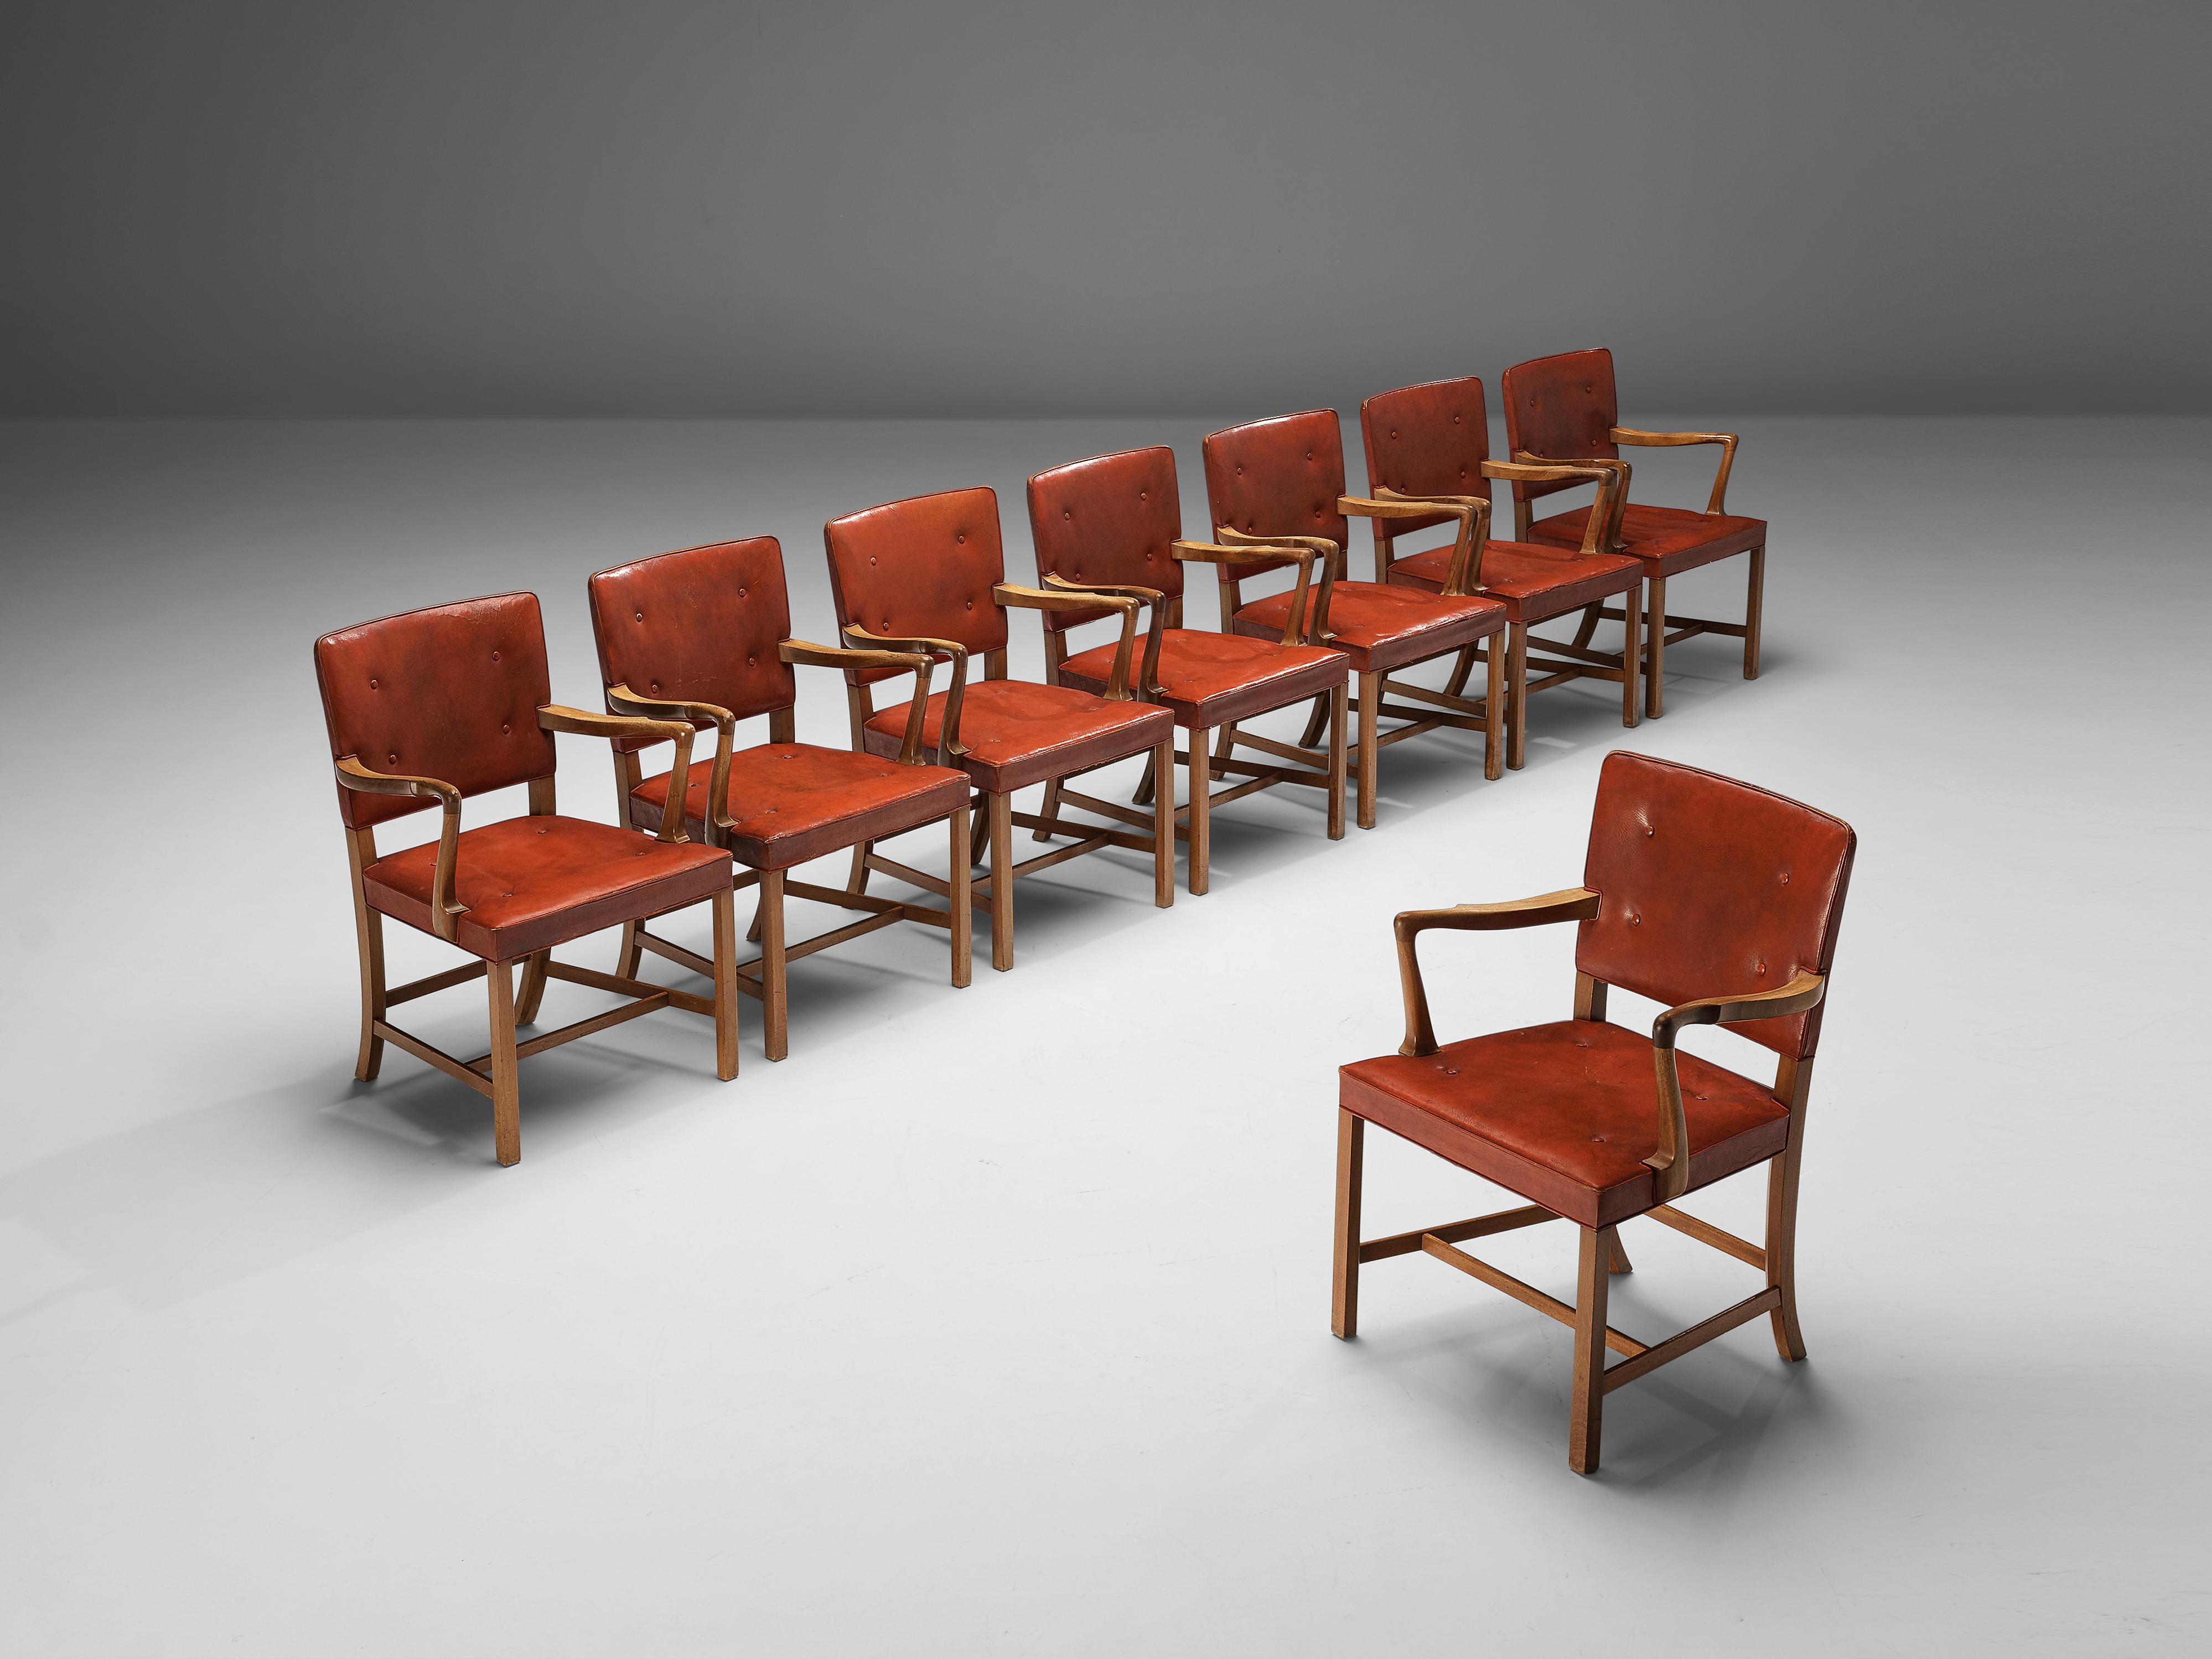 Ole Wanscher for A.J. Iversen, set of eight armchairs, red patinated leather, mahogany, Denmark, circa 1945

Set of eight elegant dining chairs in mahogany, designed by Ole Wanscher and produced by A.J. Iversen. These chairs show a combination of